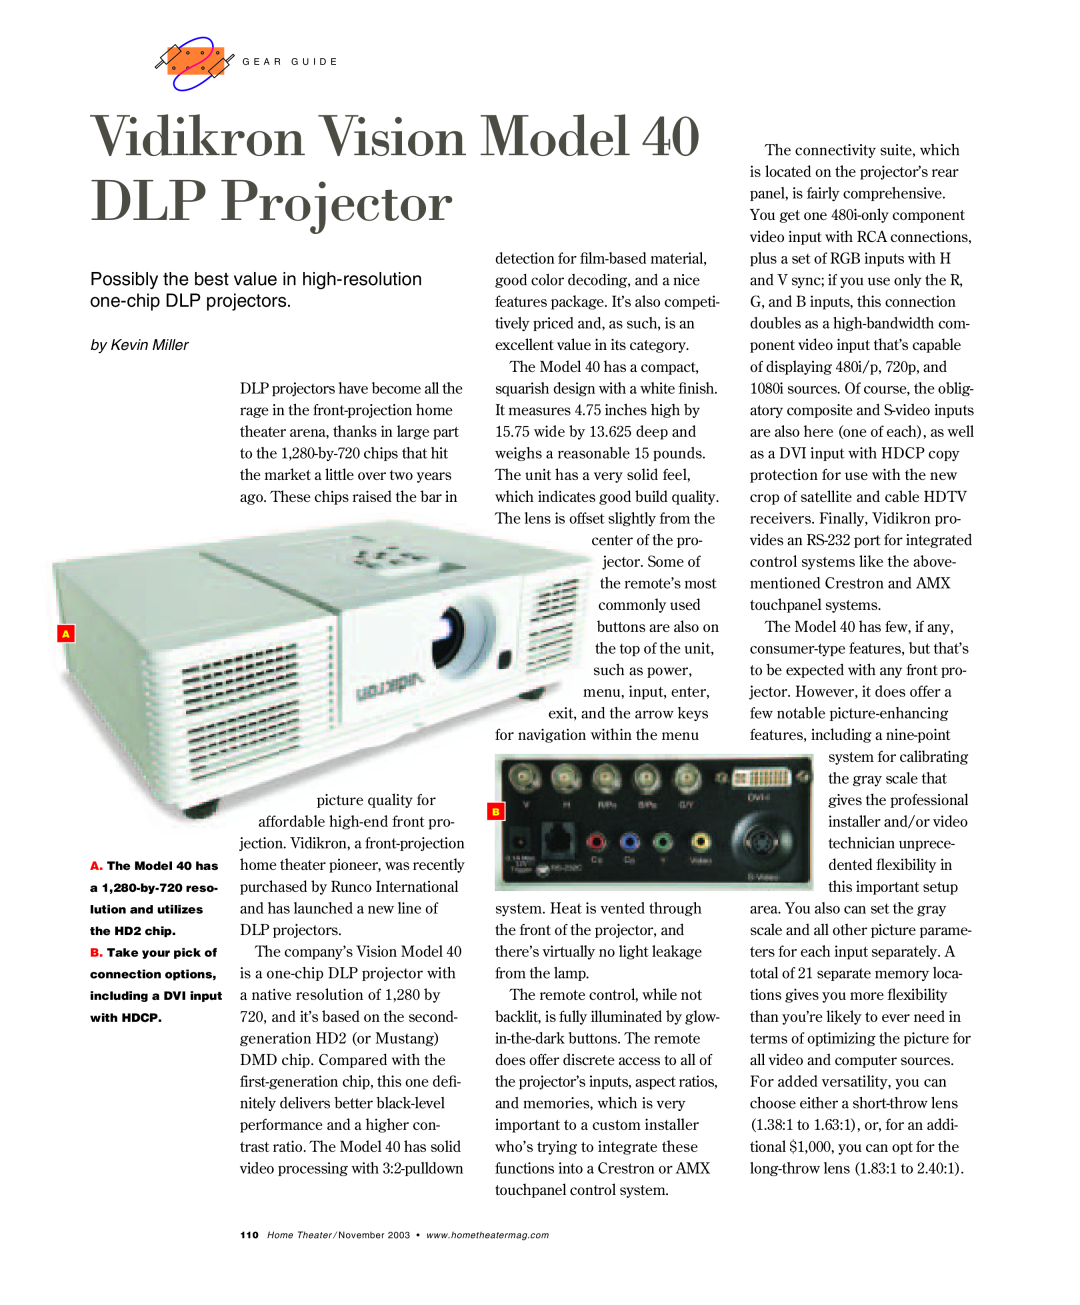 Vidikron 40 HT manual Vidikron Vision Model, DLP Projector, Possibly the best value in high-resolution, by Kevin Miller 